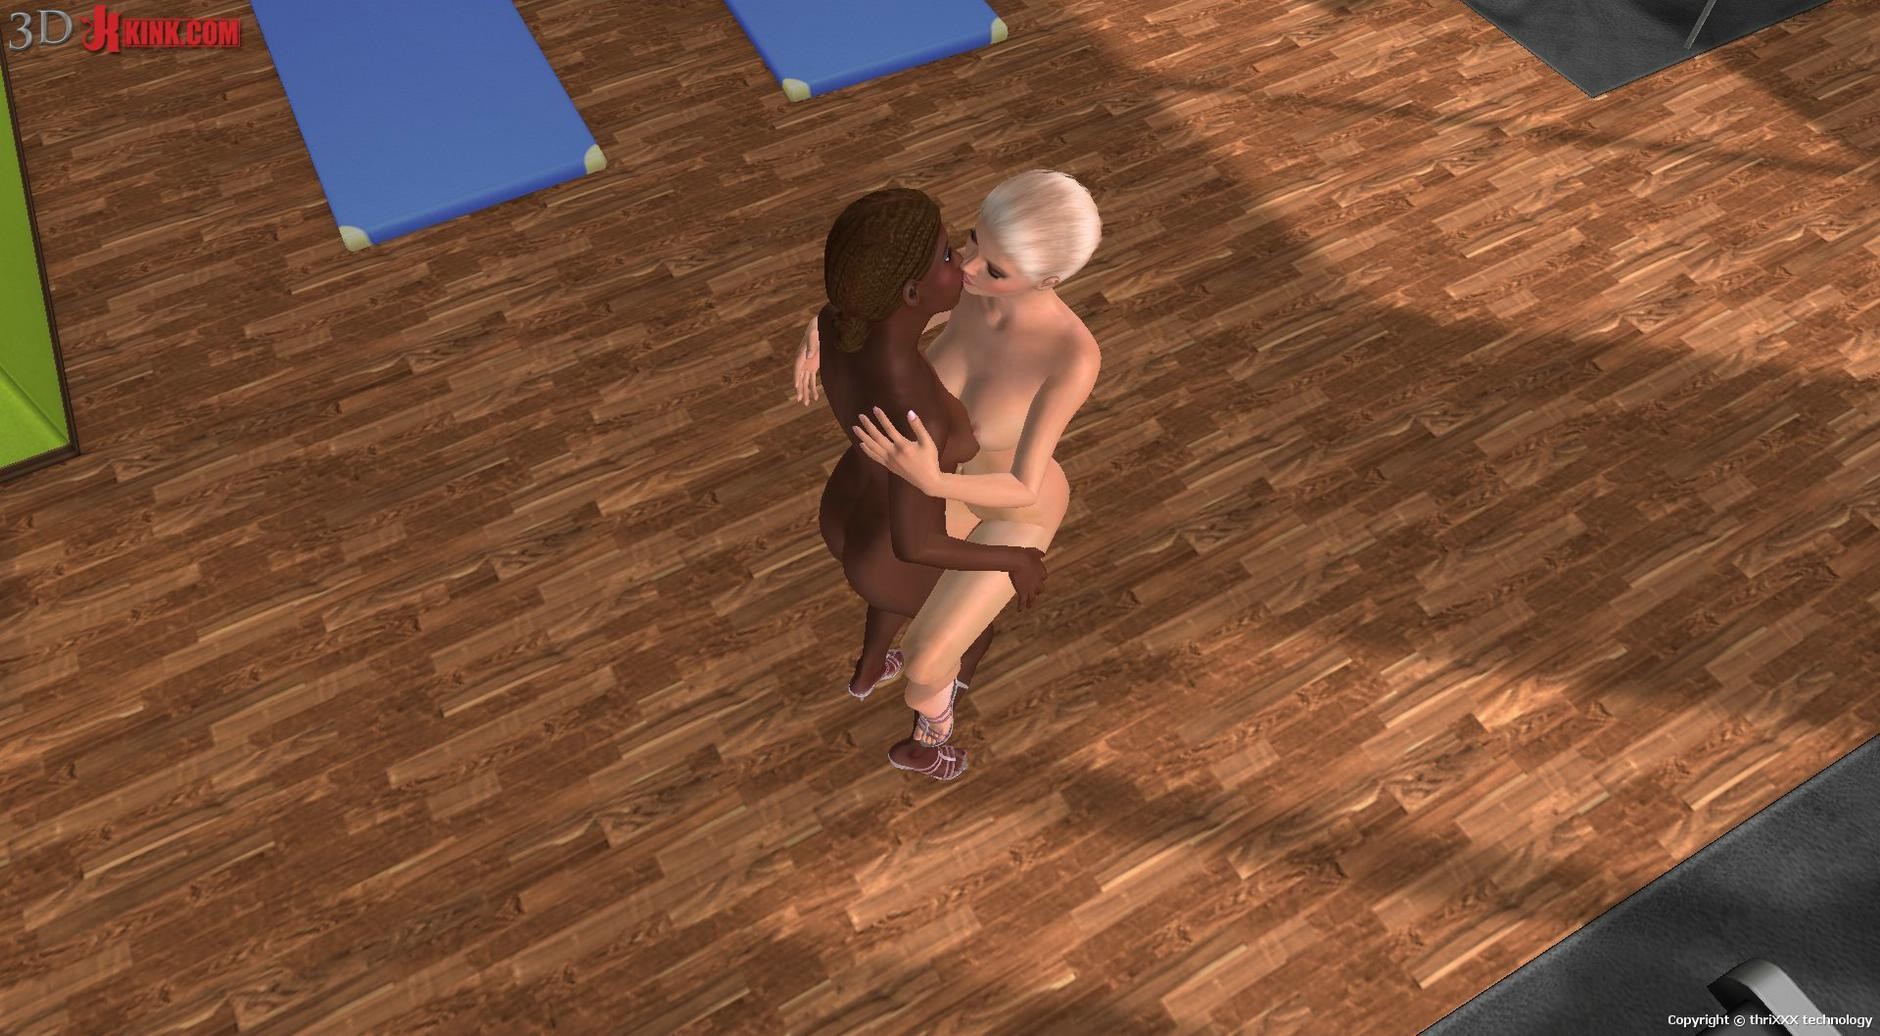 Interracial lesbian sex action created in interactive 3D game #69357088